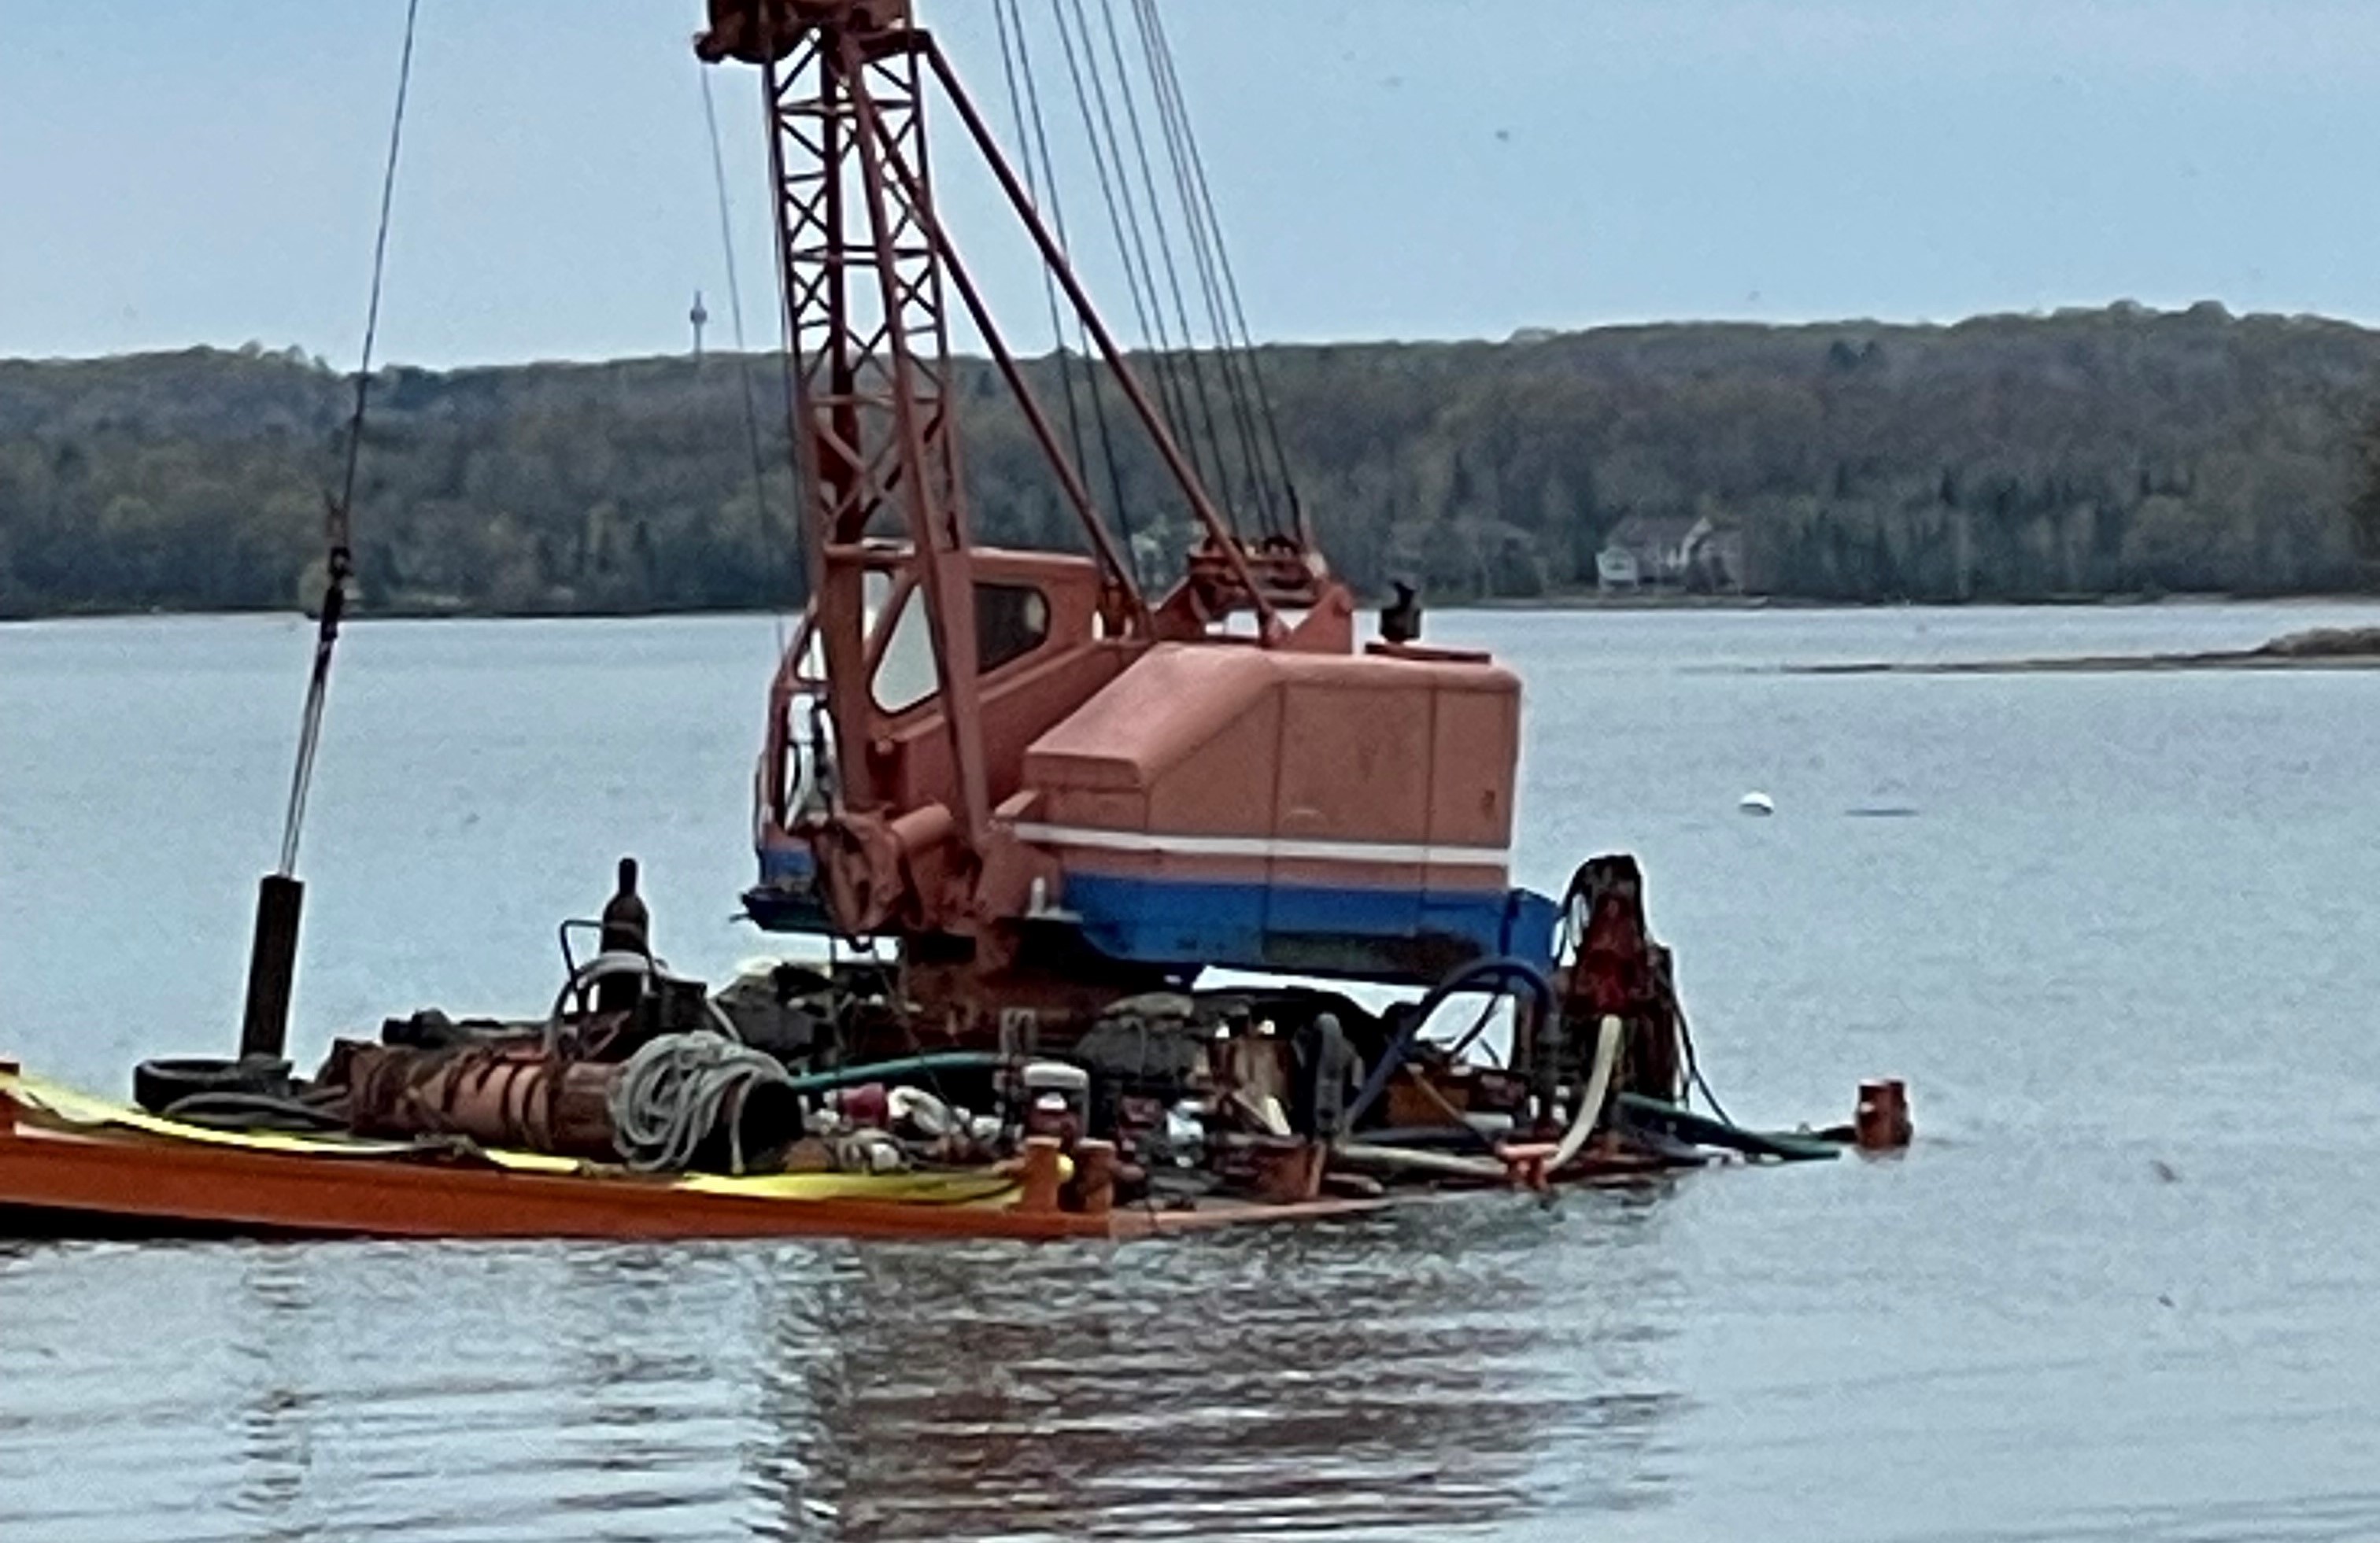 A barge owned by Balcom Marine Contractors lists in the Lake Michigan waters of Grand Traverse Bay on May 6, 2023. Listing is a nautical term for taking on water and tilting to one side.